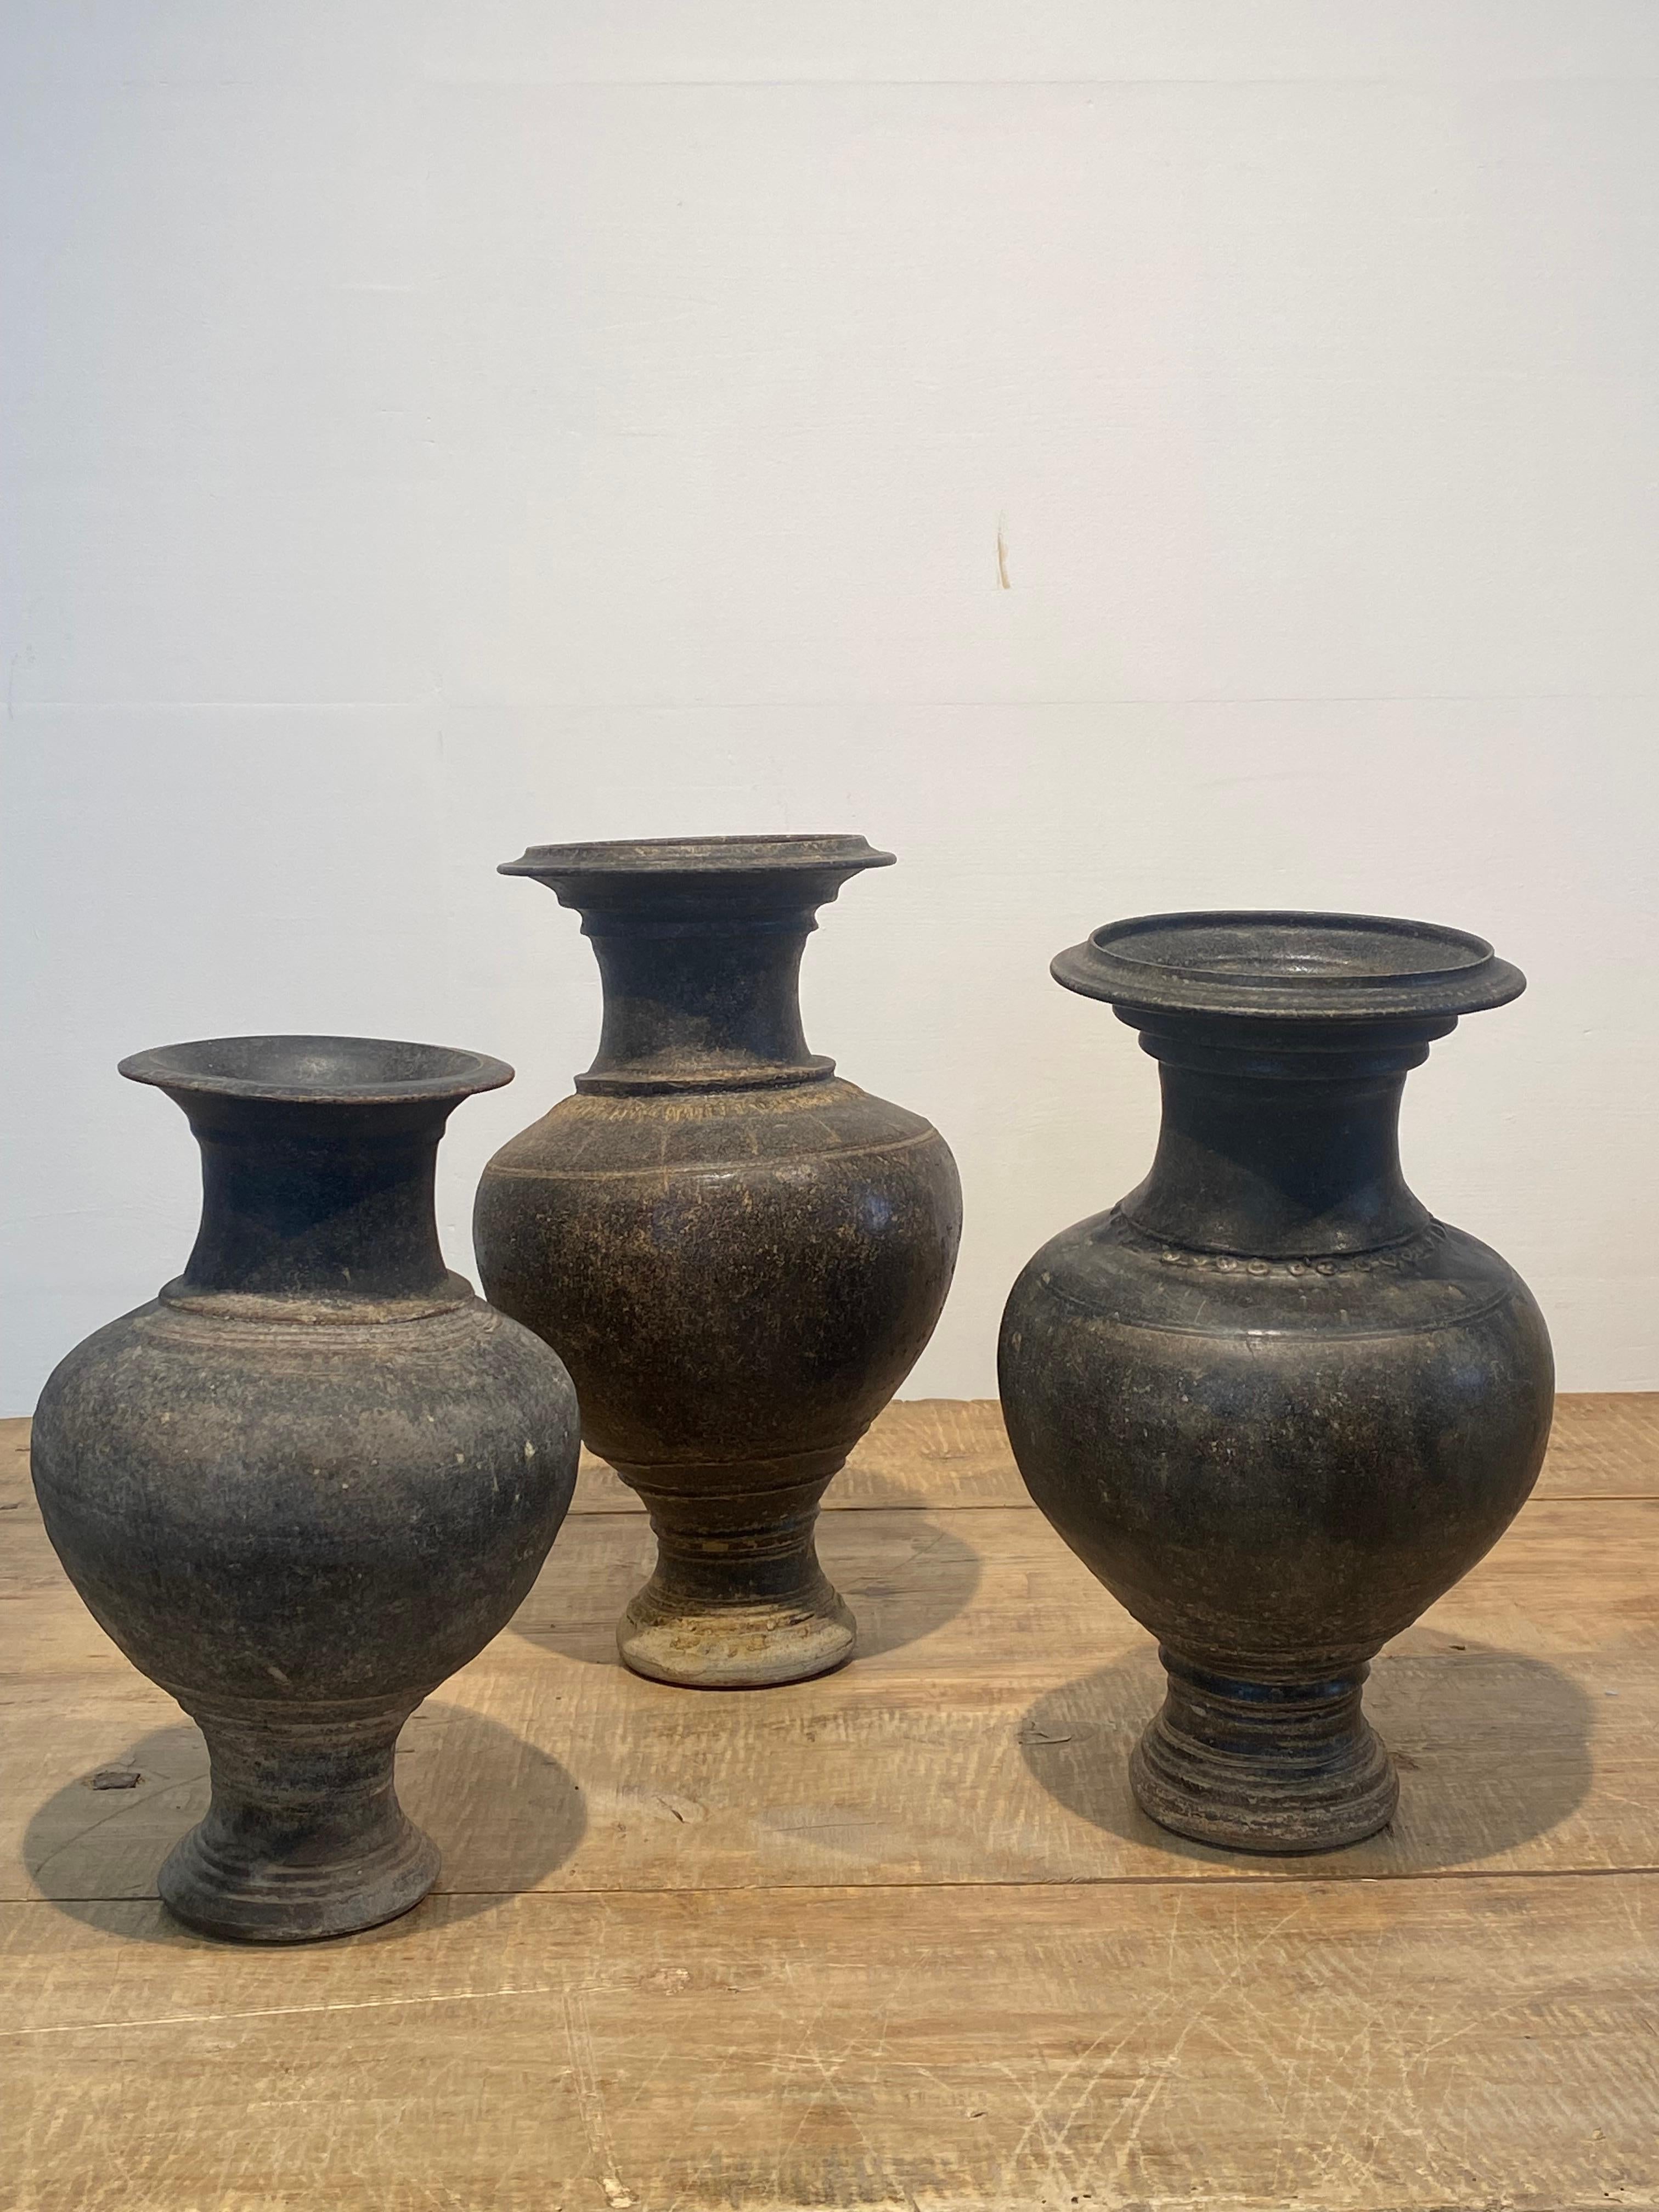 A beautiful set of 3 antique KHMER vases from South East Asia,
from the Thailand-Cambodia area,
good patina and shine of the glazed Brown terracotta,
fine decorations and design of the vases,11-13 th Century,
very decorative vases , ideal to combine